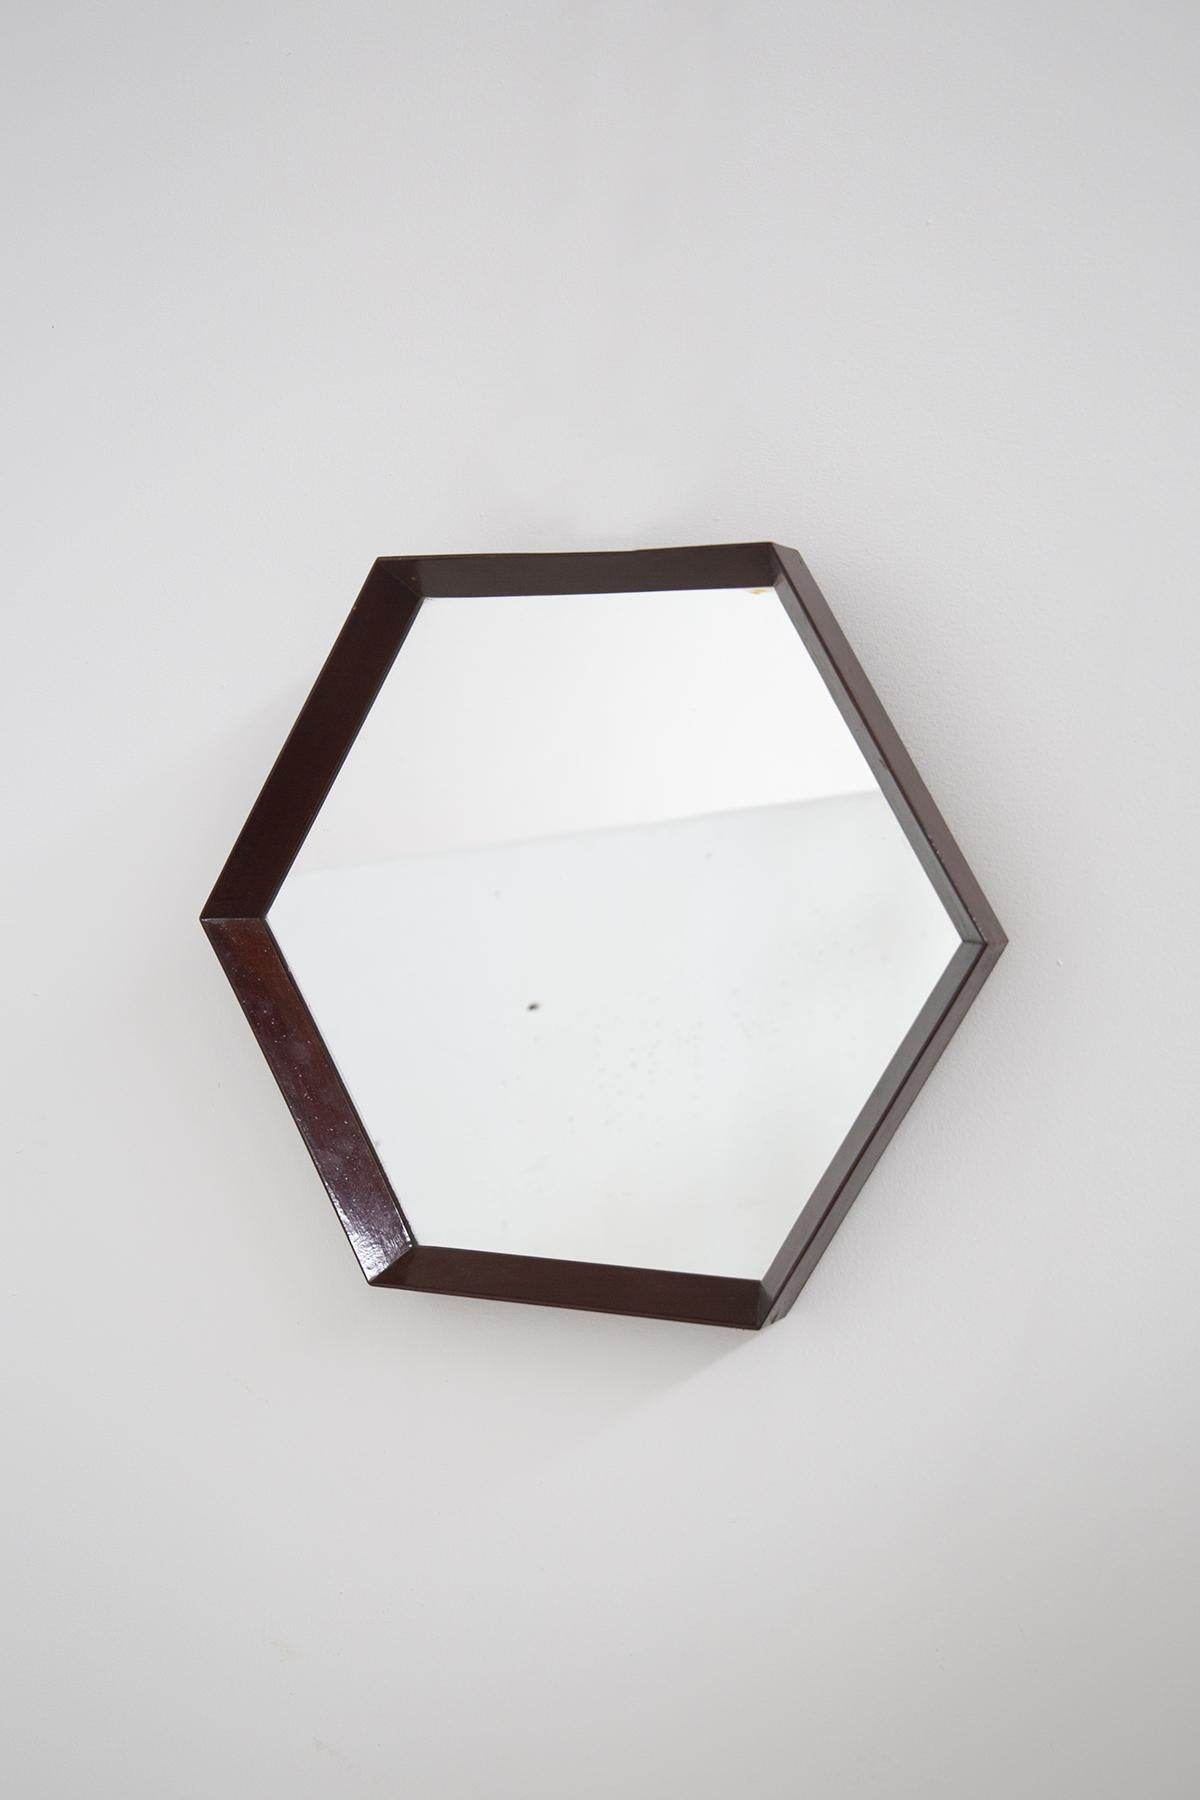 Italian wall mirror by Campo and Carlo Graffi from 1960. The mirror is made with a hexagonal shaped wooden border and inside mirrored glass. The mirror is ideal for entryways or living rooms or over a console table. 
Light scratches from wear and